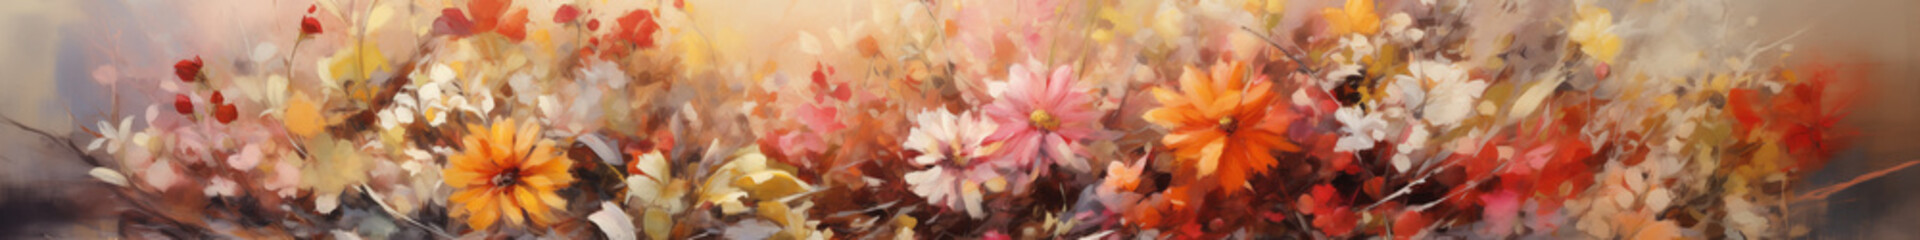 Abstract Banner painting, texture background, flowers, plants, flowers